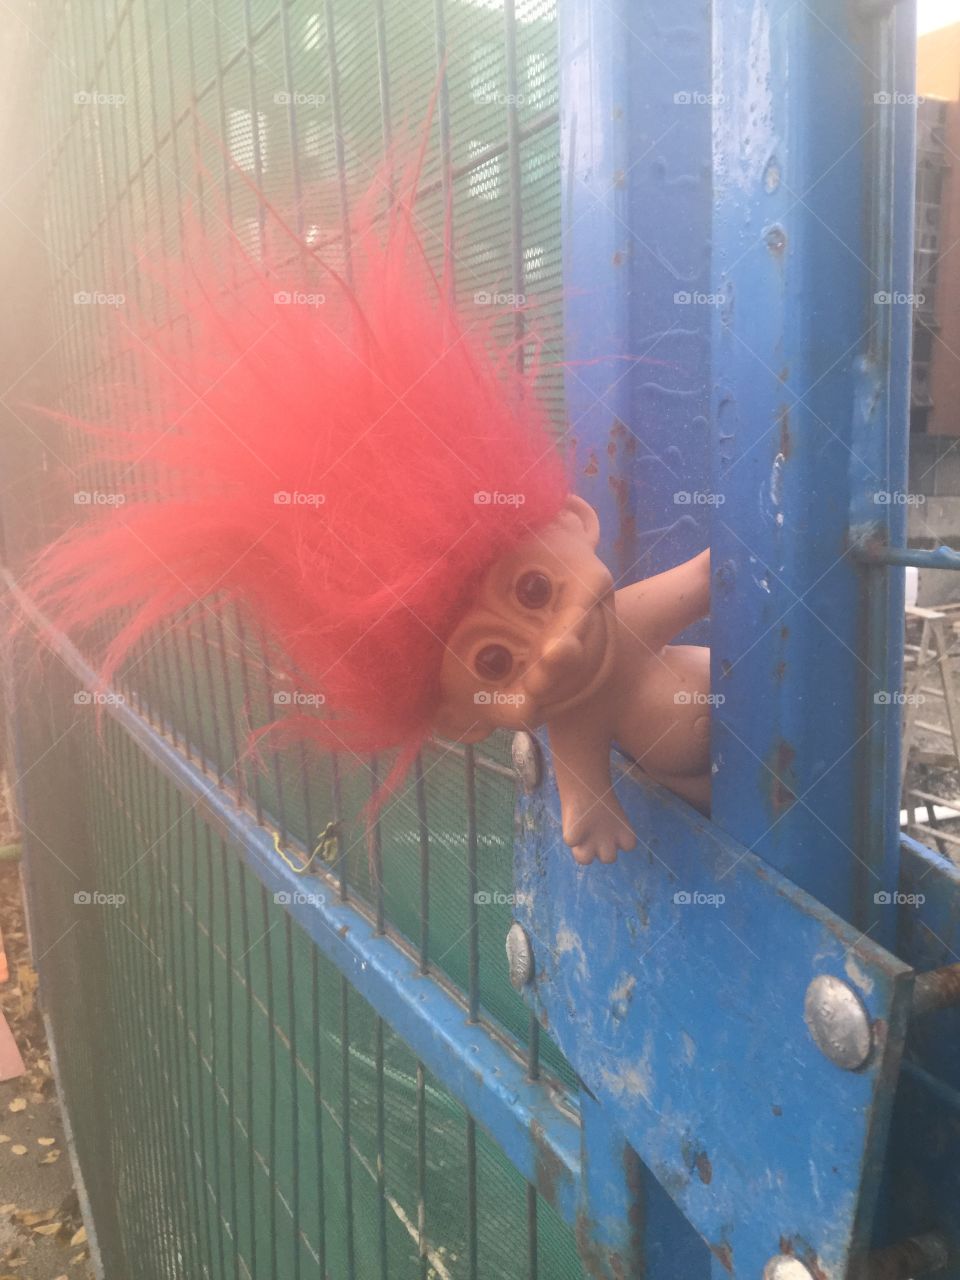 Today I found this troll toy laying on the ground so I put him on the fence & took a photo of him. Pretty cool huh